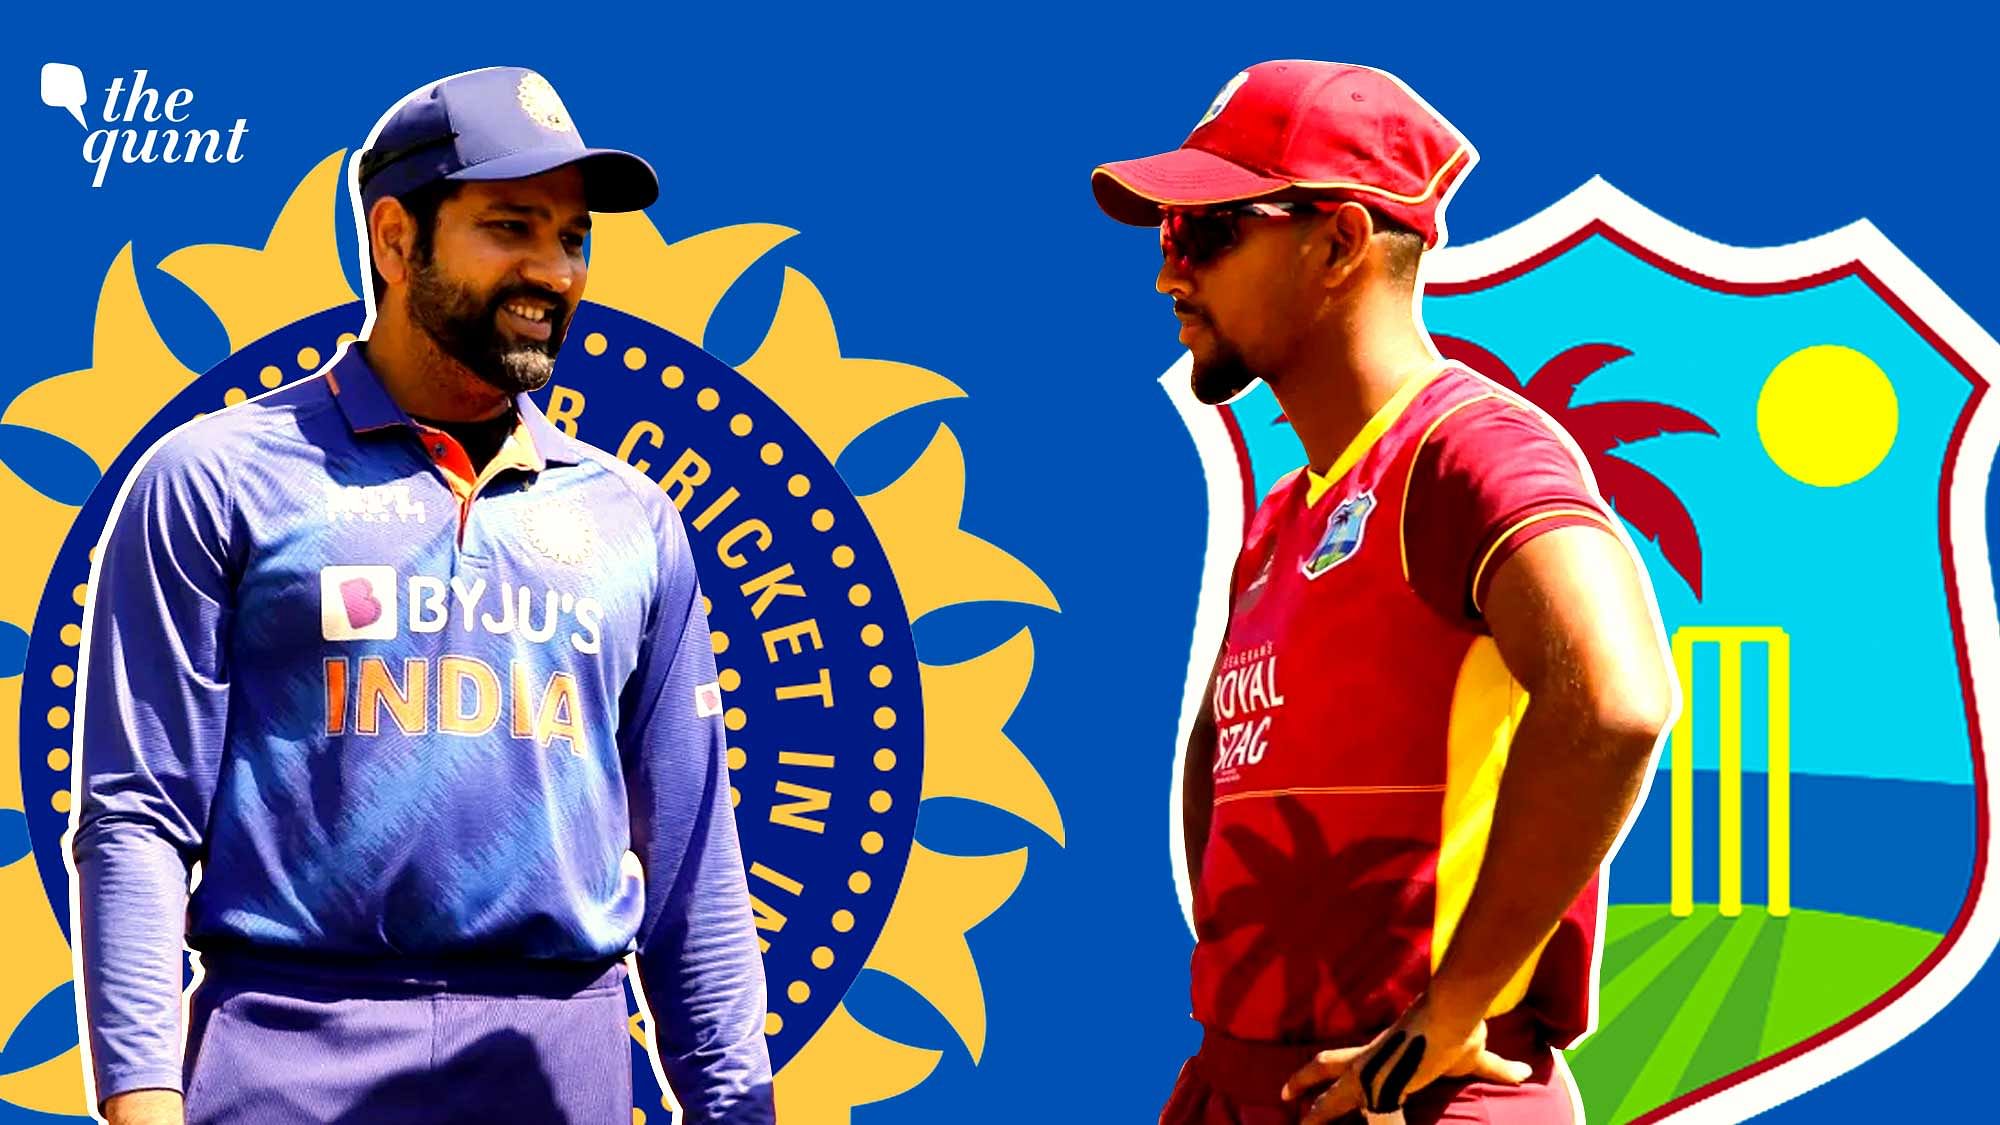 IND vs WI 3rd T20 Live Streaming and Telecast India vs West Indies 3rd T20I Date, Time, Venue, Squads, Prediction, and More